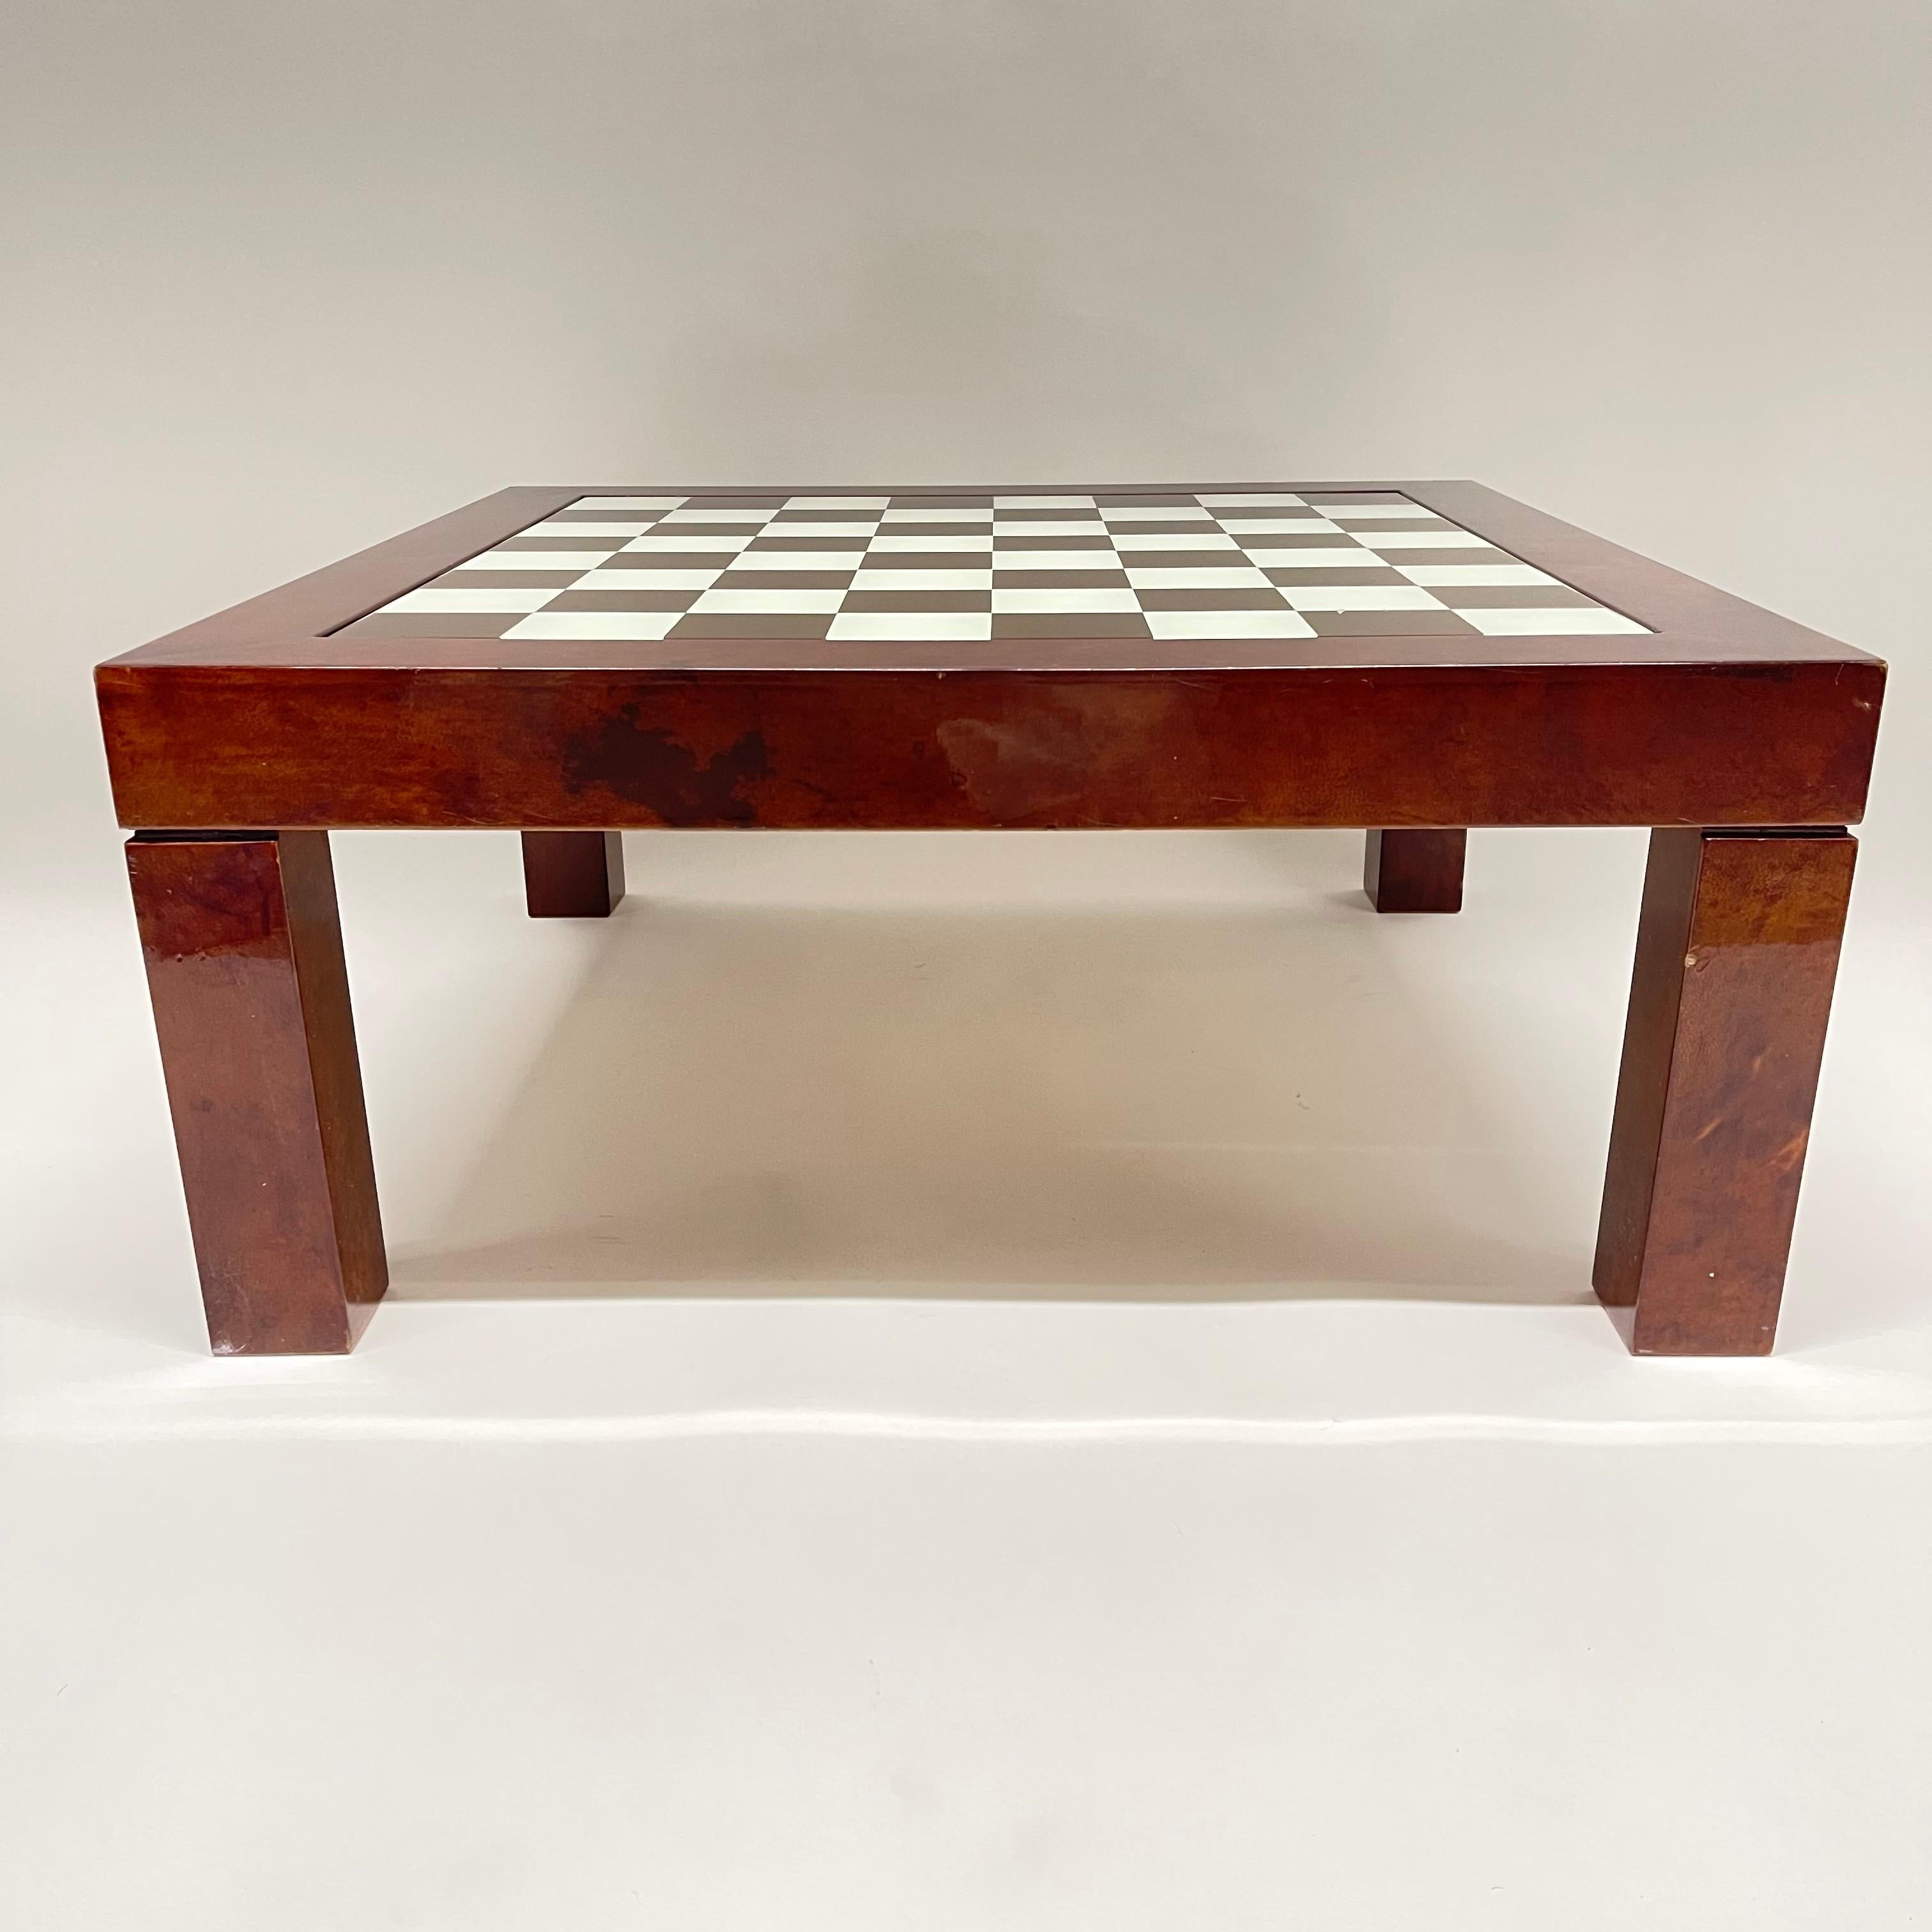 Versatile midcentury parsons coffee or cocktail game table rendered in lacquered goatskin with inset glass checkerboard or chess top, designed by Aldo Tura, Italy, circa 1970s.